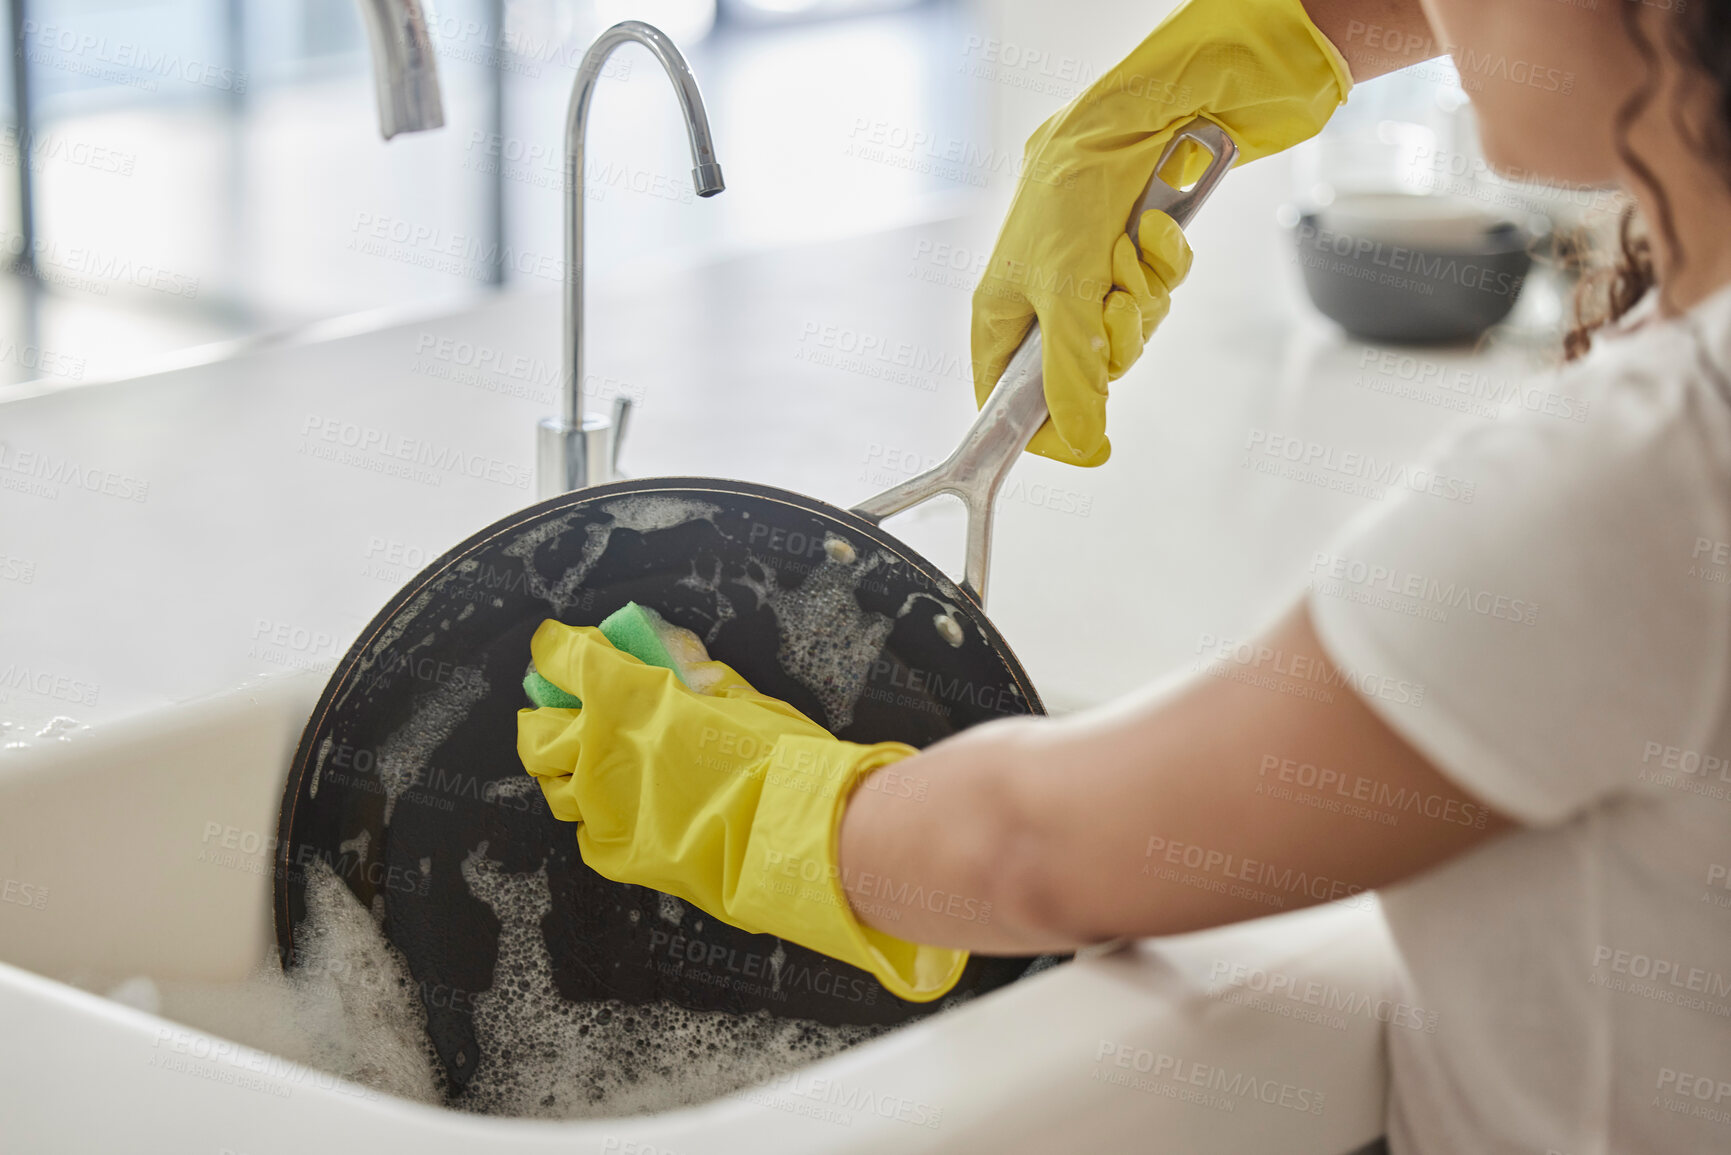 Buy stock photo Cleaning pan, washing and hygiene hands with soap and water in the kitchen sink in home. Zoom of a female hand and bacteria to disinfect, protect and prevent the spread of germs with liquid foam